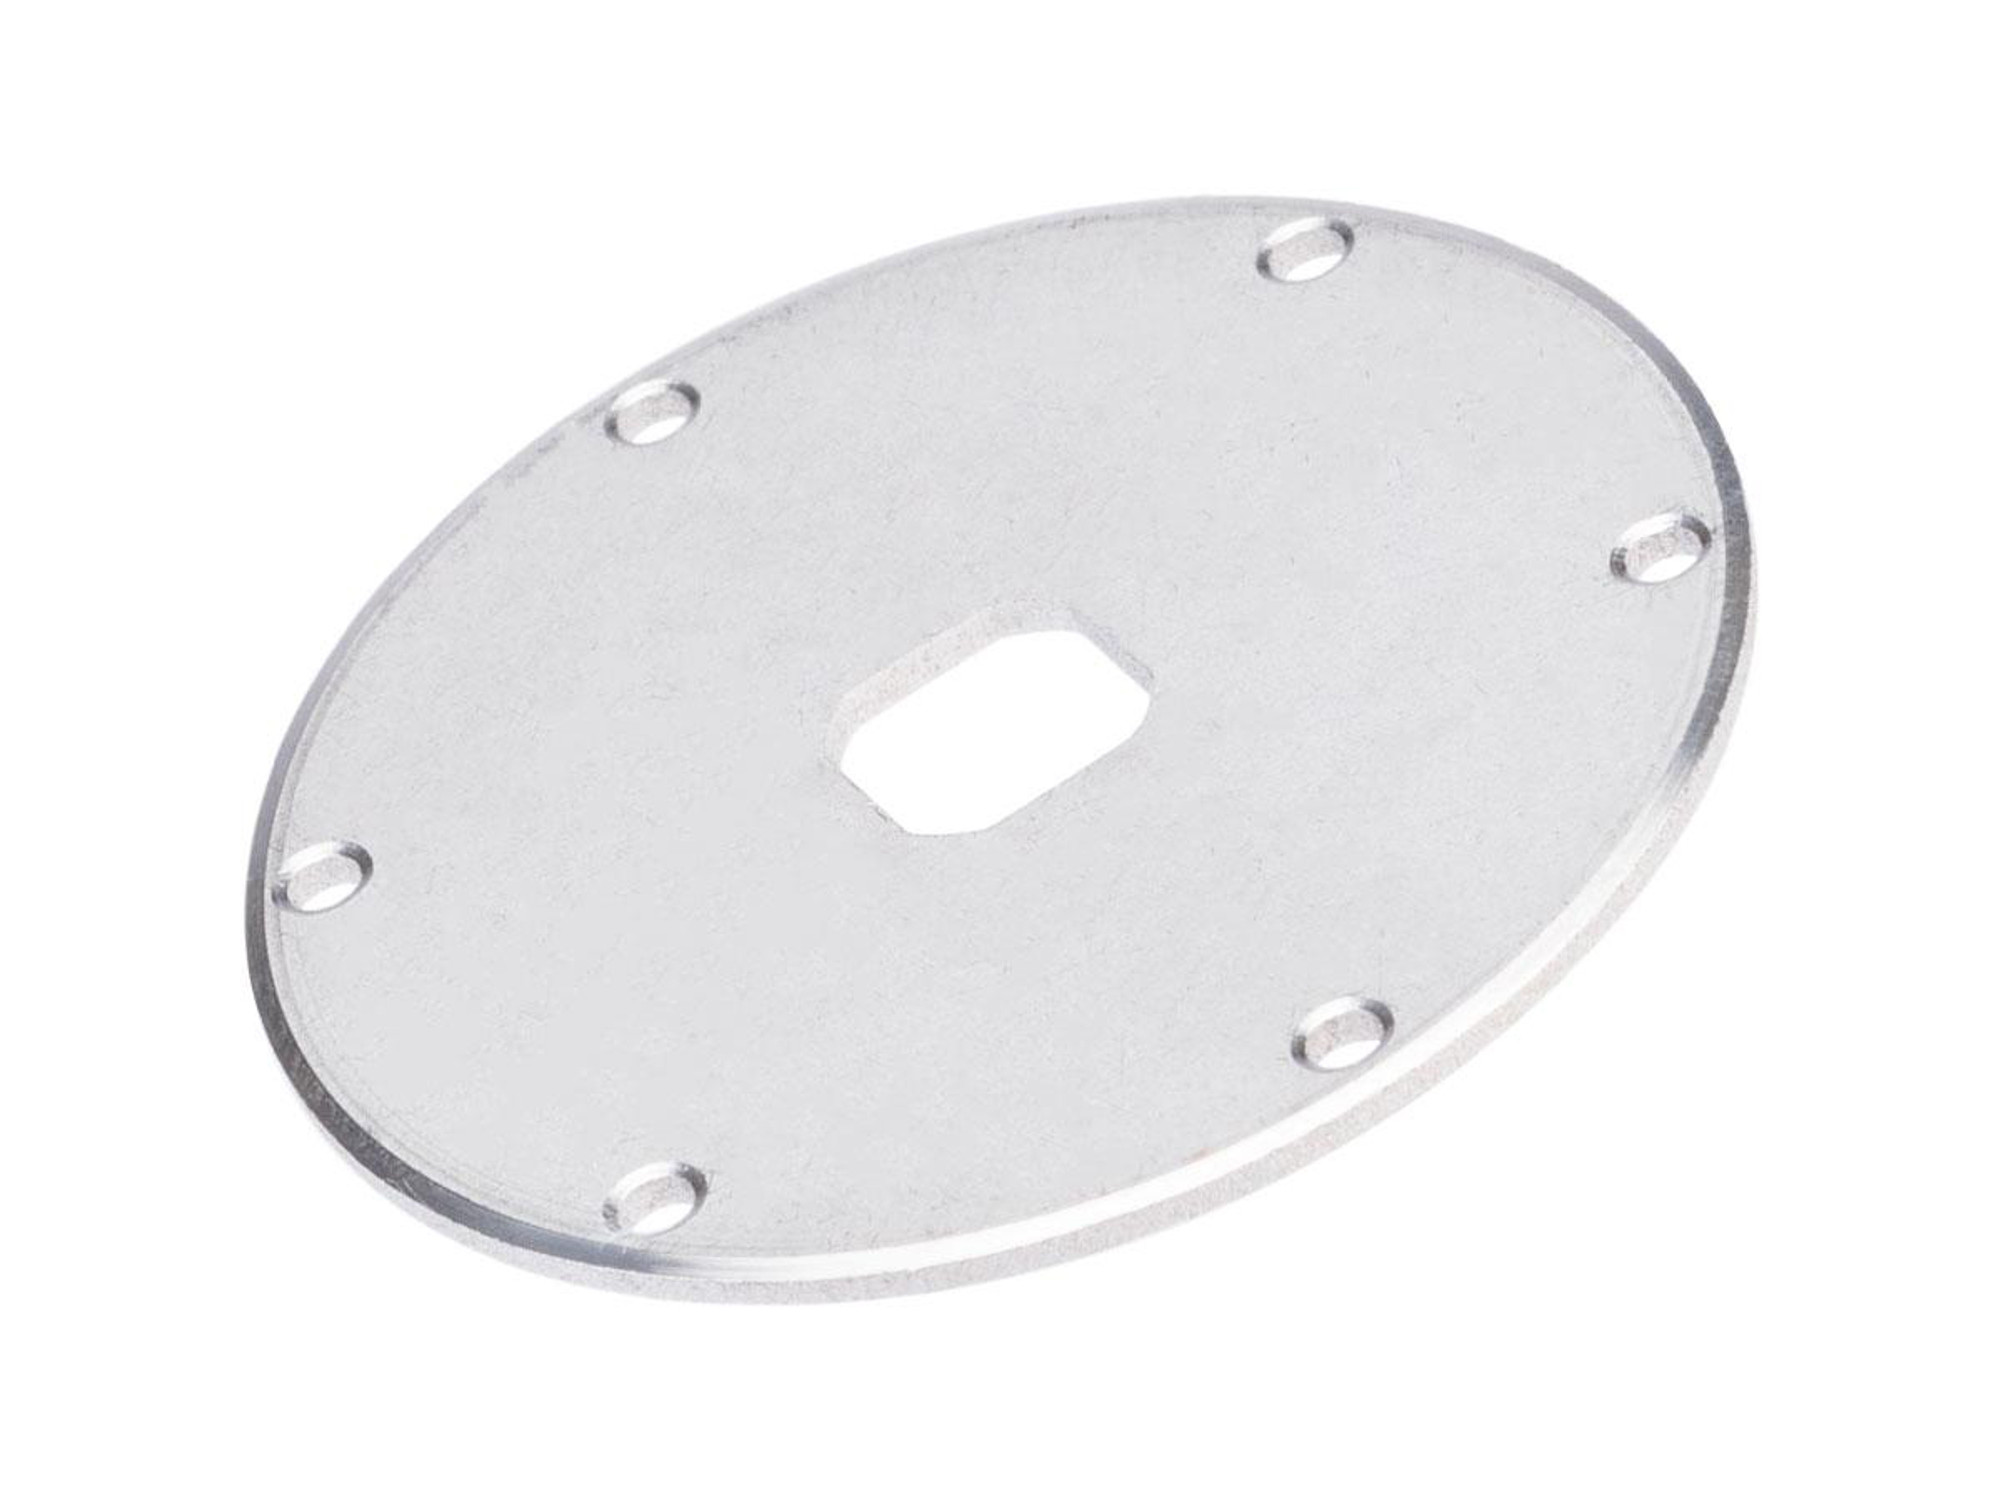 Jigging Master Reel Replacement Parts (Part: #385 / Front Drag Plate)